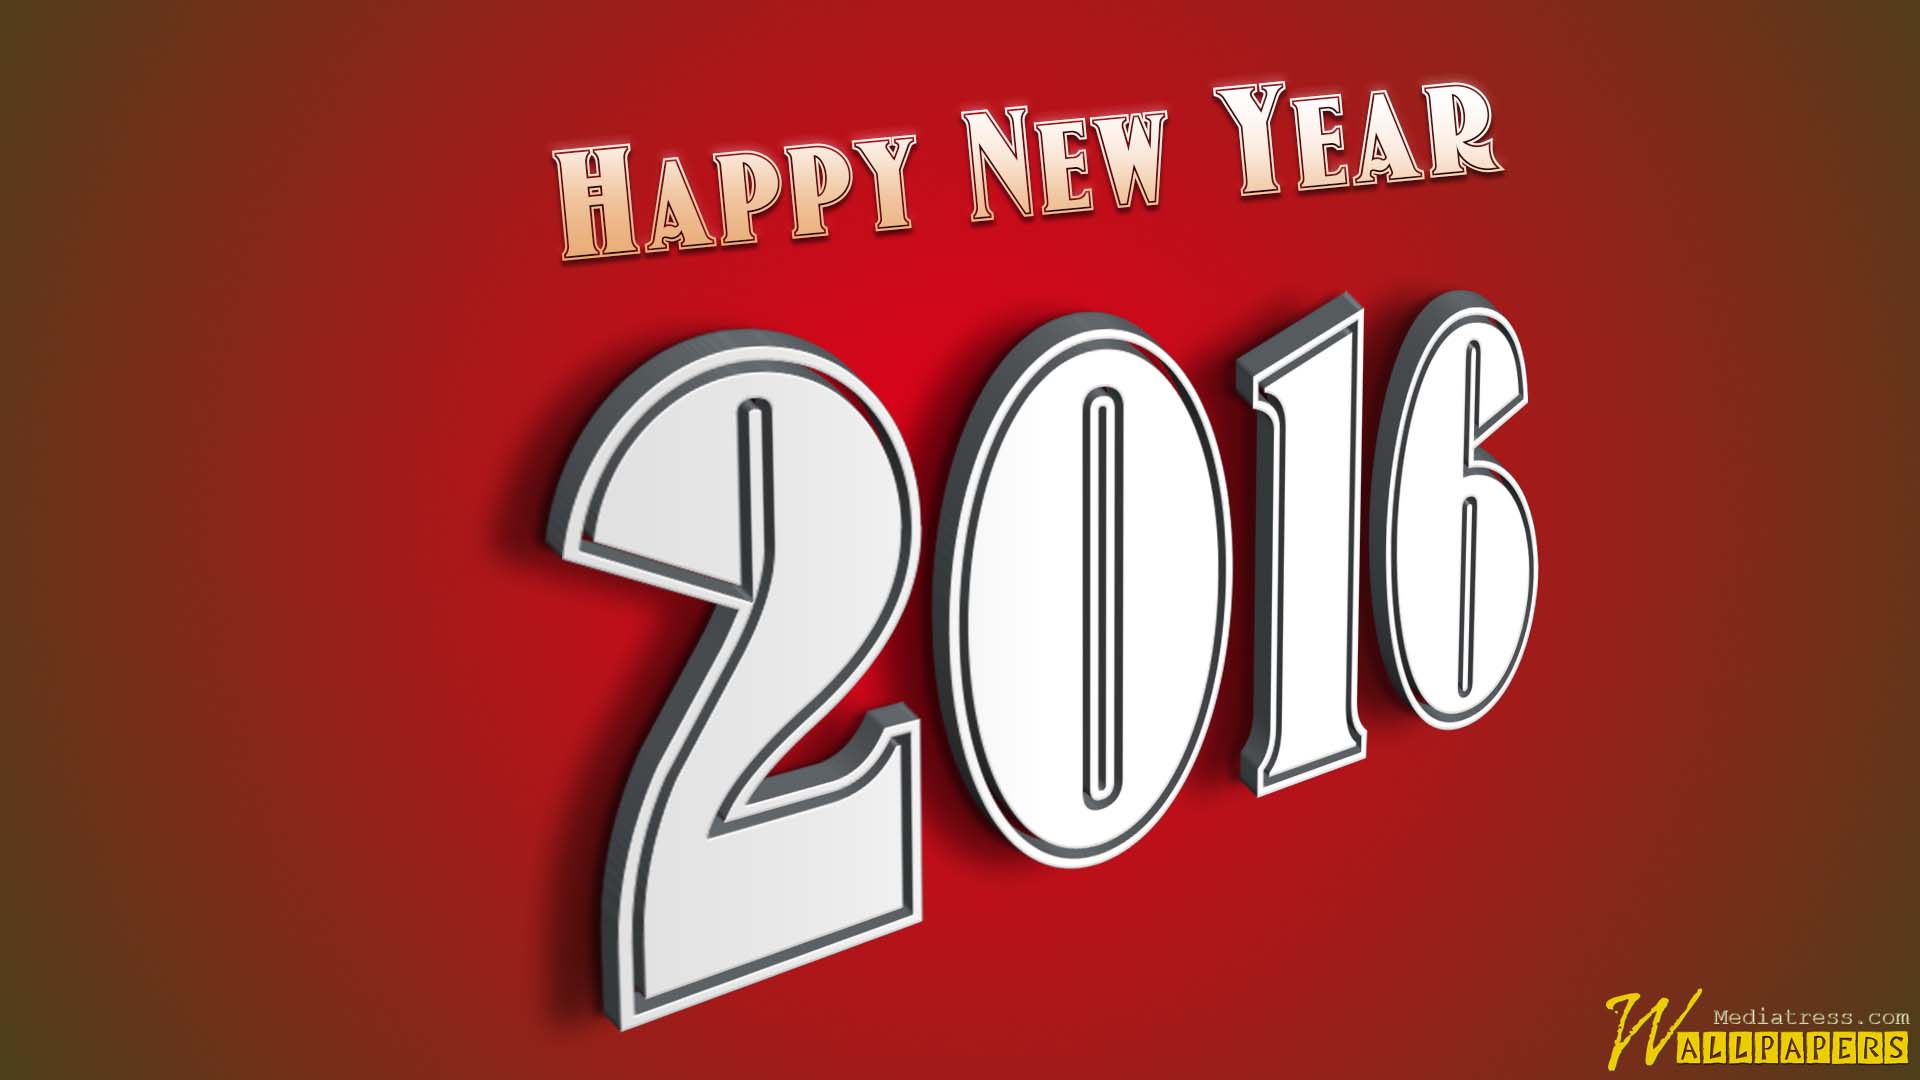 Beautiful Happy New Year Wallpapers HD (11)